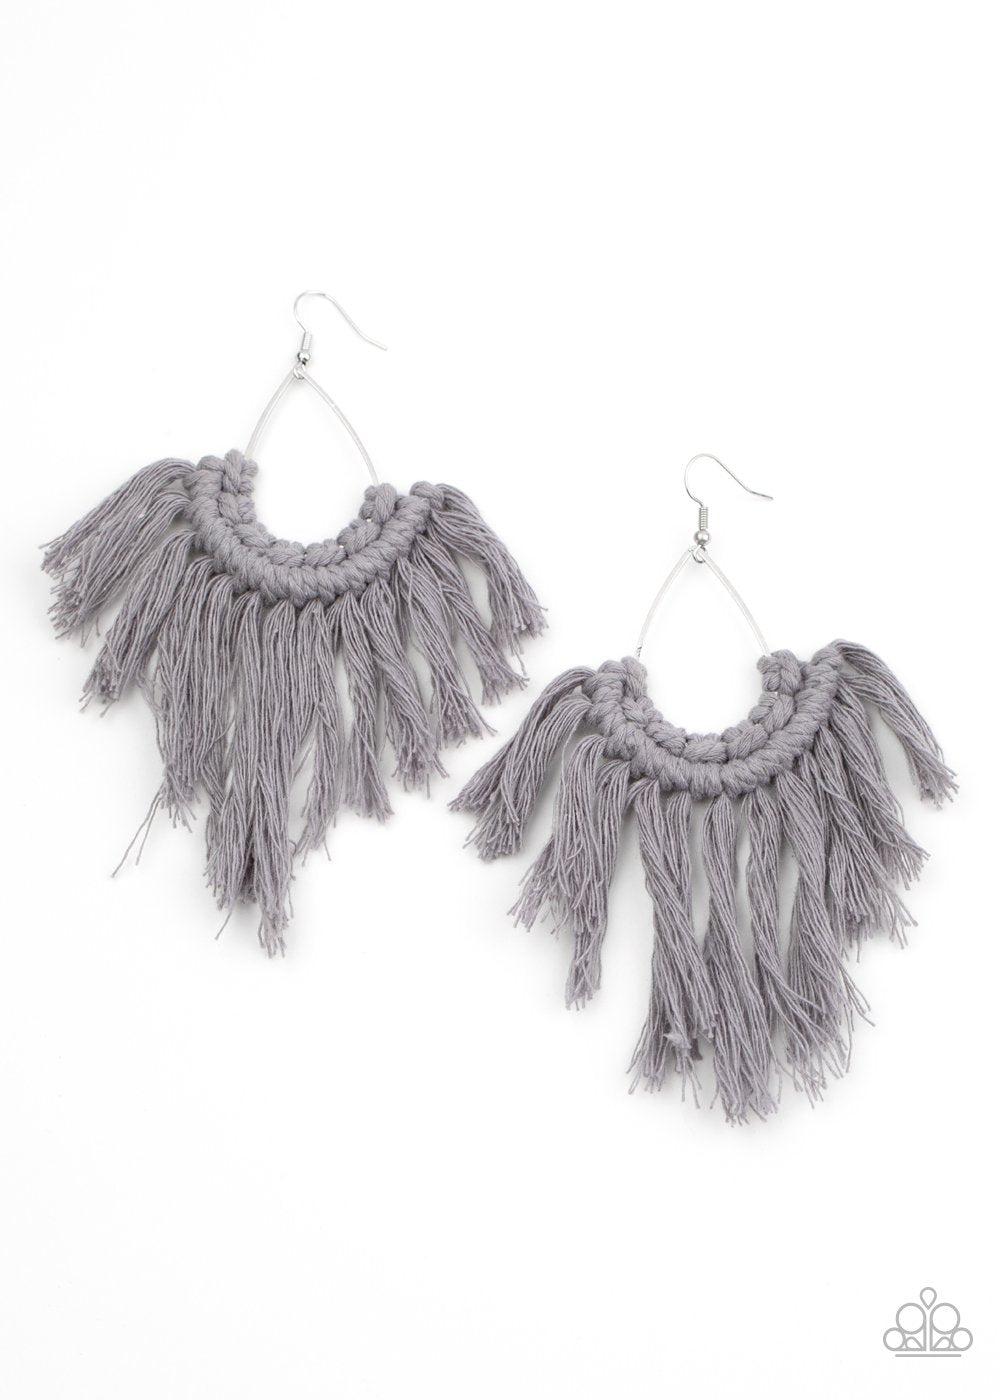 Wanna Piece Of MACRAME Silver Earrings - Paparazzi Accessories-CarasShop.com - $5 Jewelry by Cara Jewels